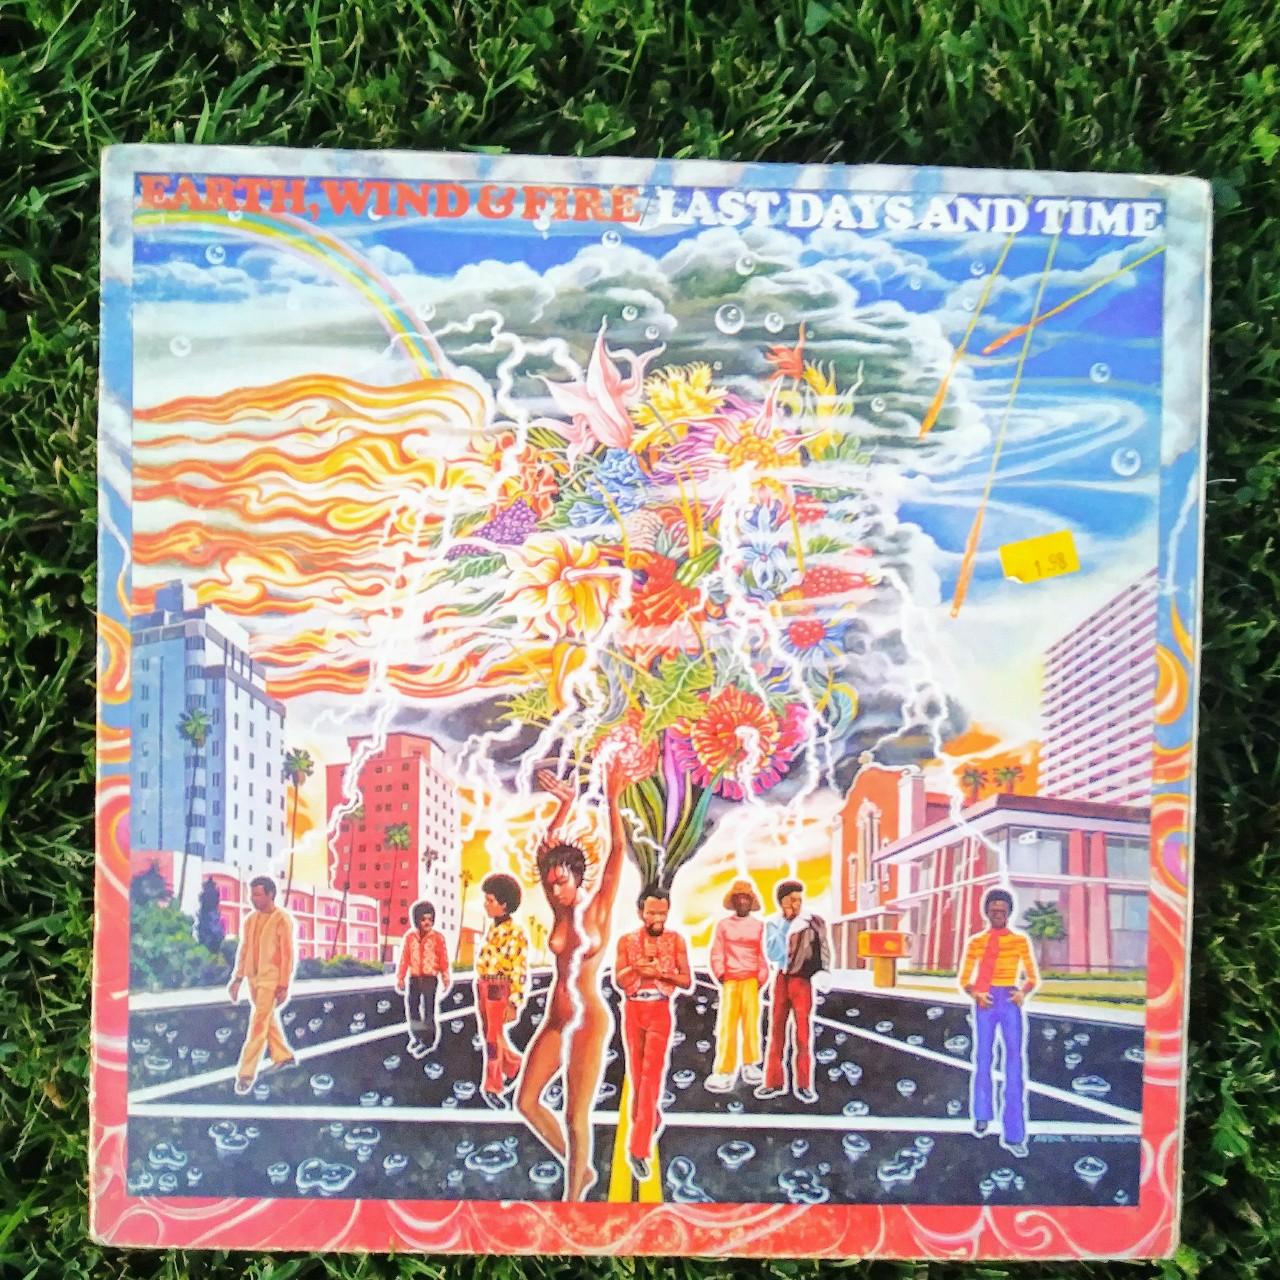 Earth, Wind and Fire Last days and Time album... - Depop